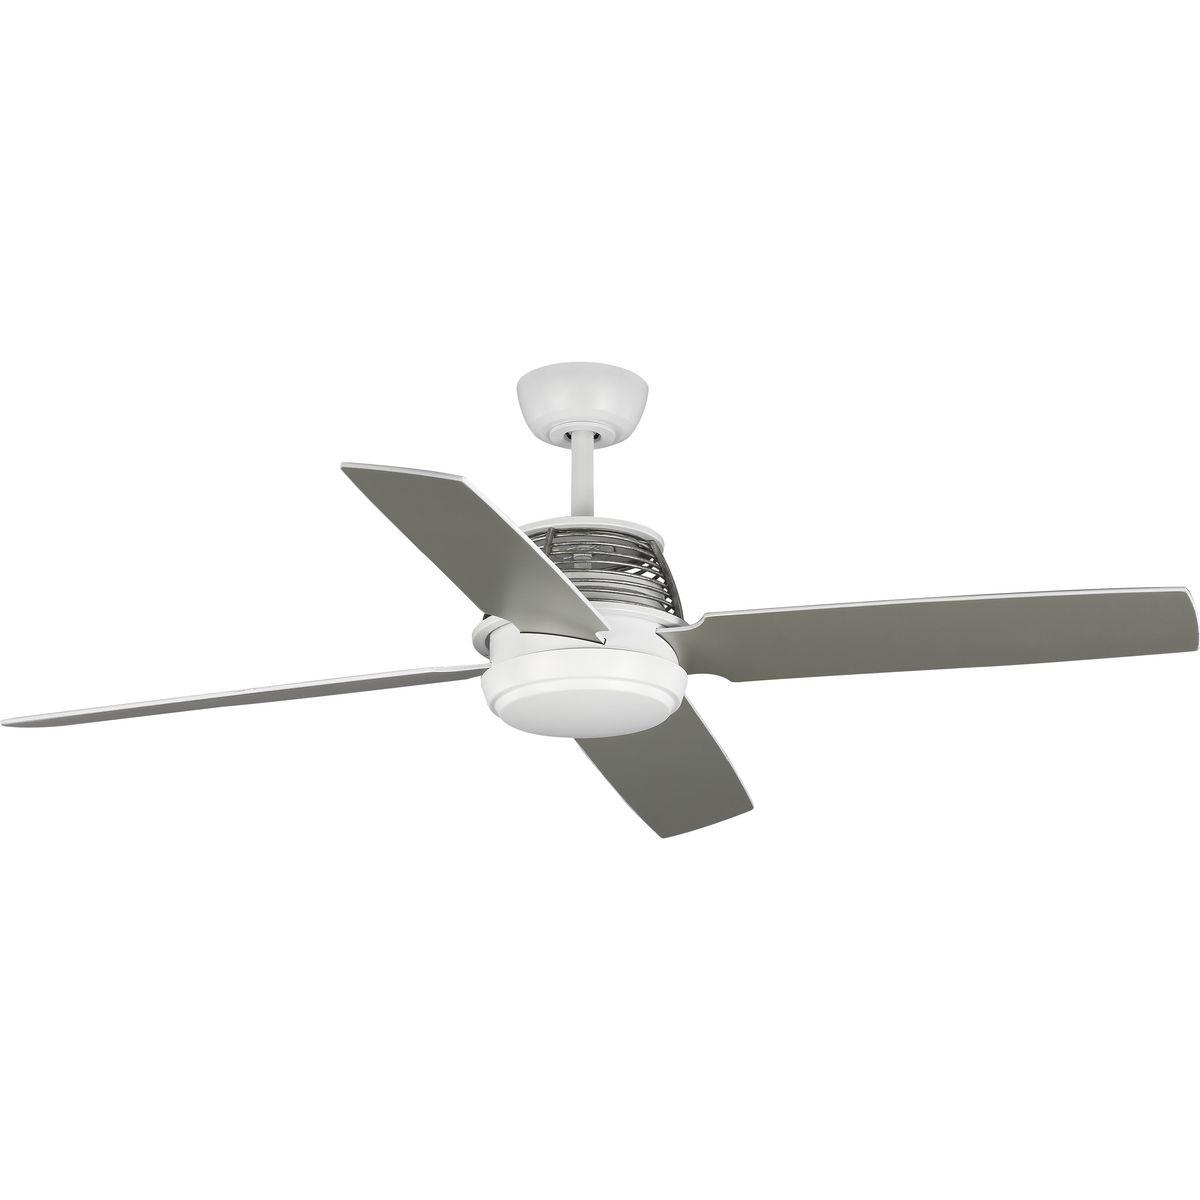 Hubbell P2590-28 The 56” Schaffer four-blade ceiling fan blends a streamlined design with mixed metal elements and a wire mesh housing, suitable for modern and urban industrial spaces. Satin White ceiling fan has galvanized accents. A remote control with batteries is incl